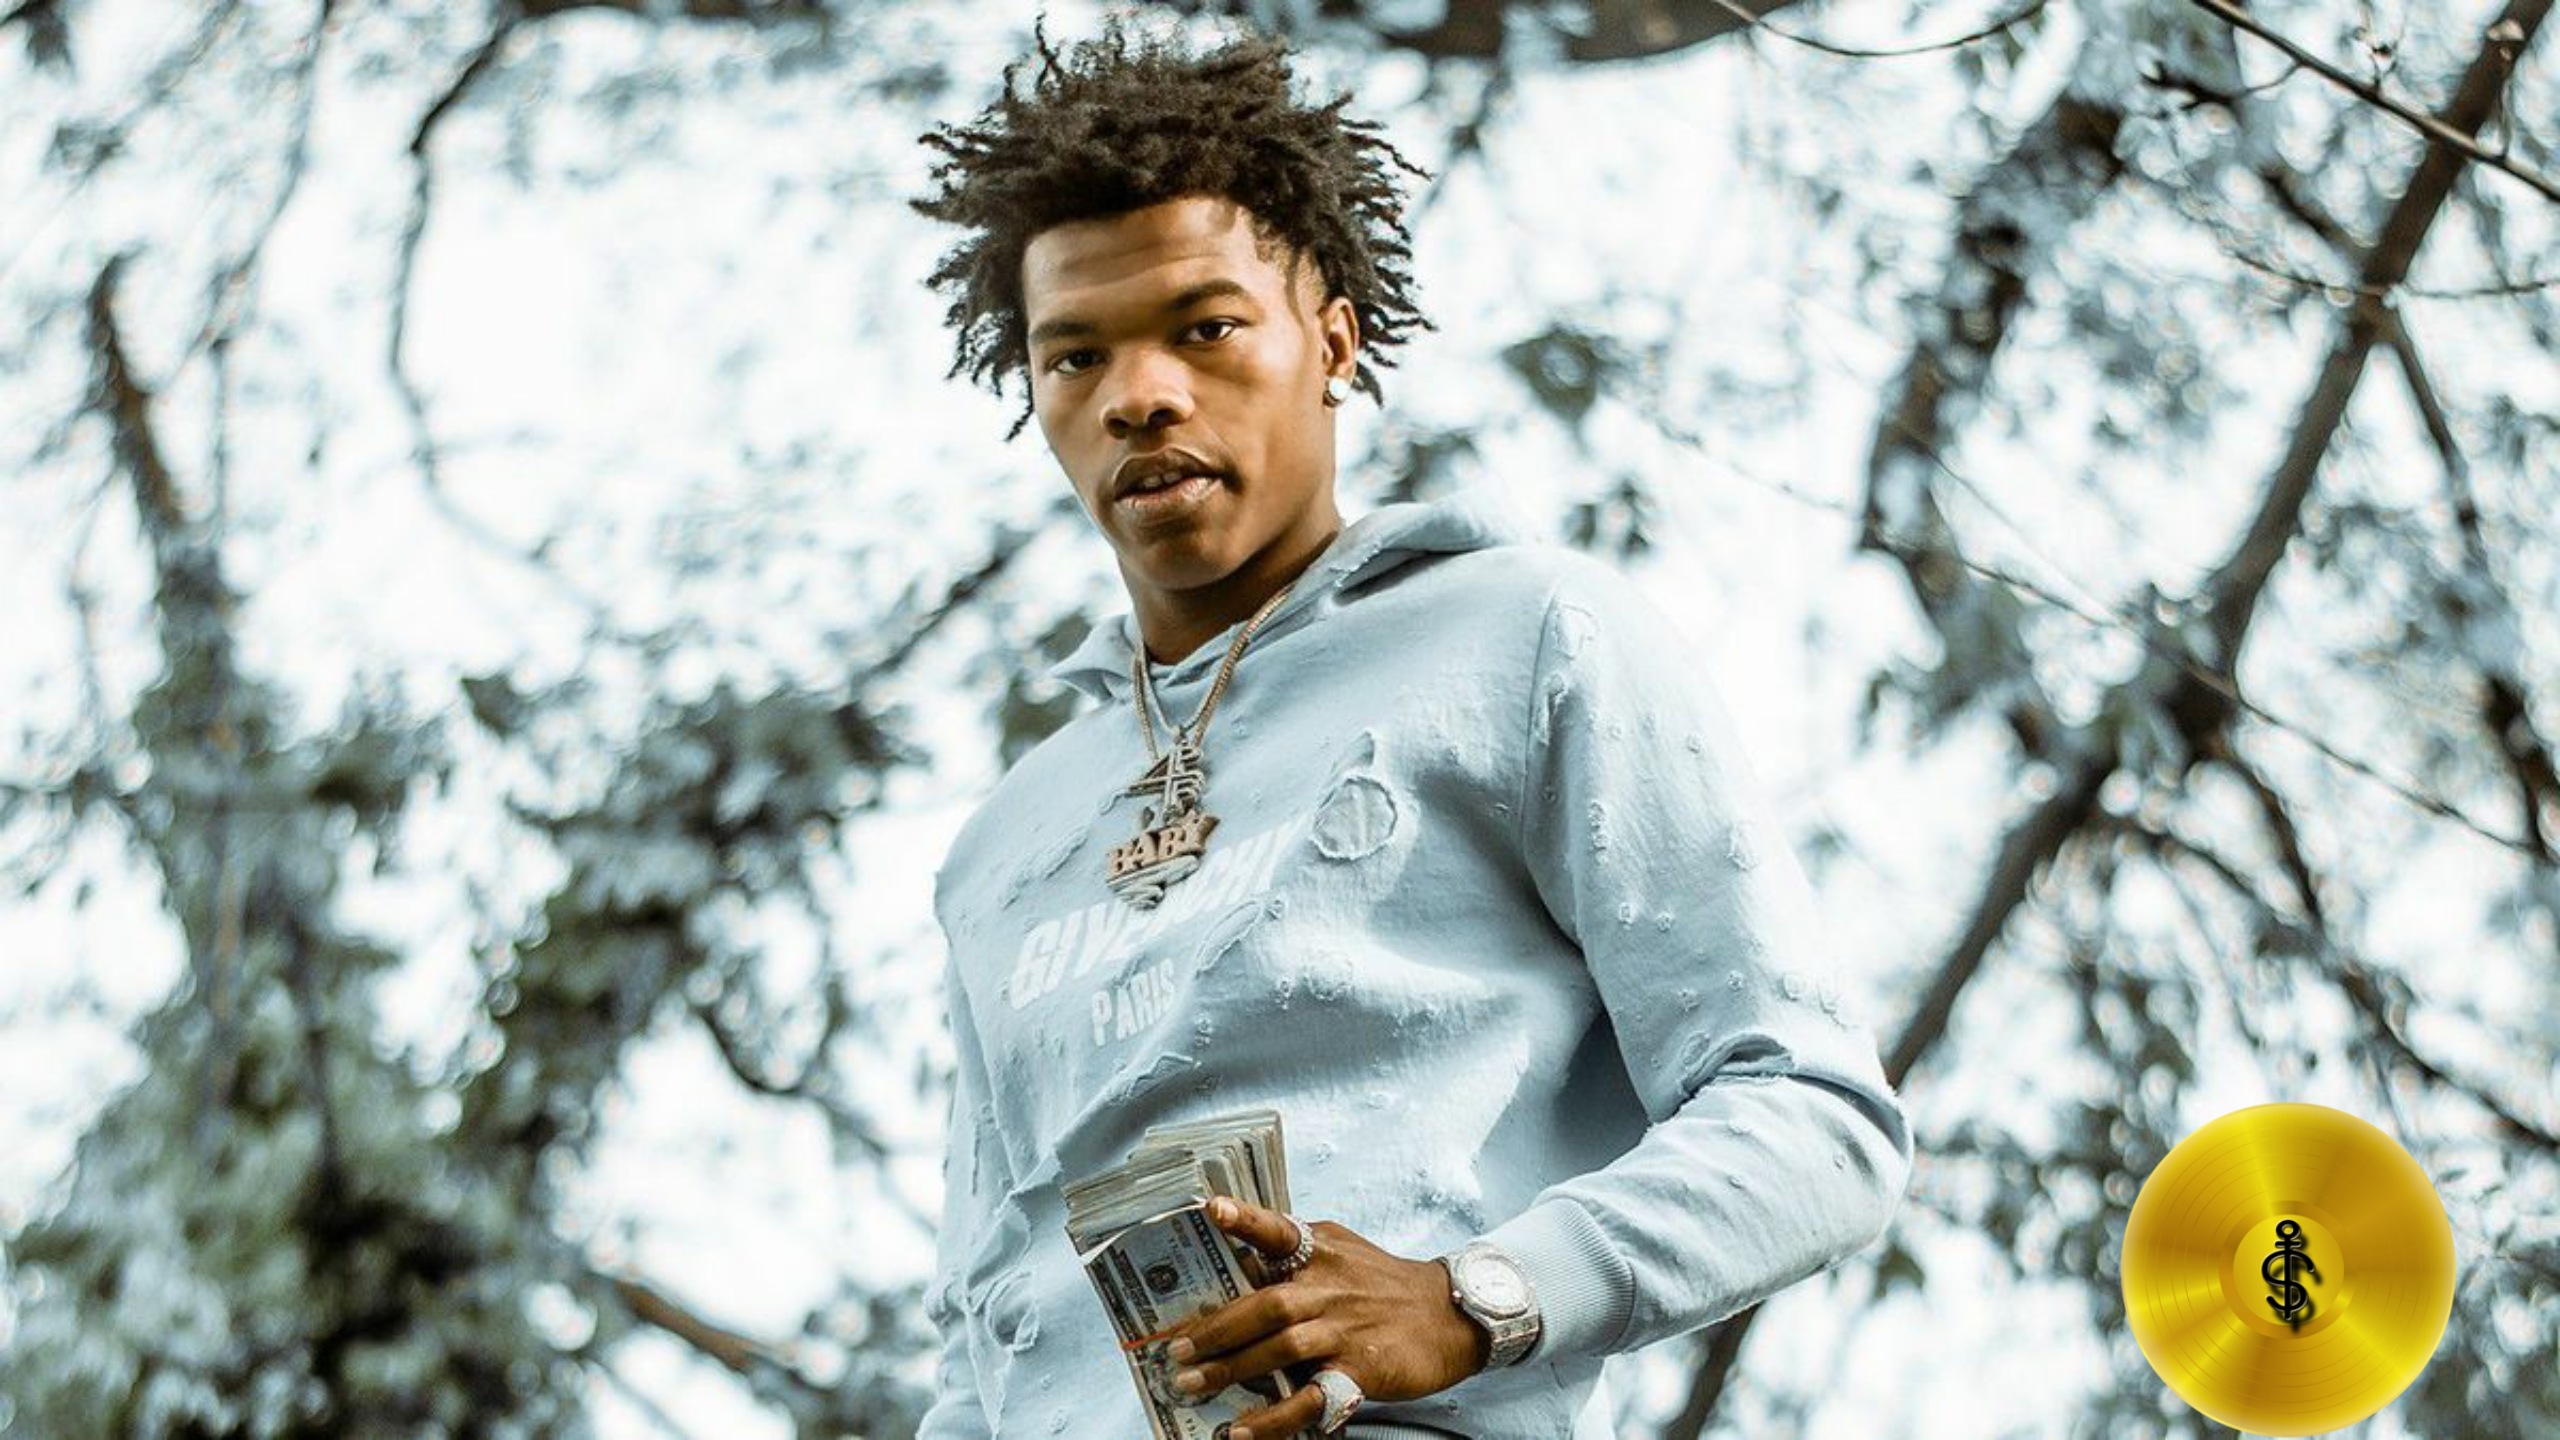 2020: The Year Of Lil Baby and “His Turn”